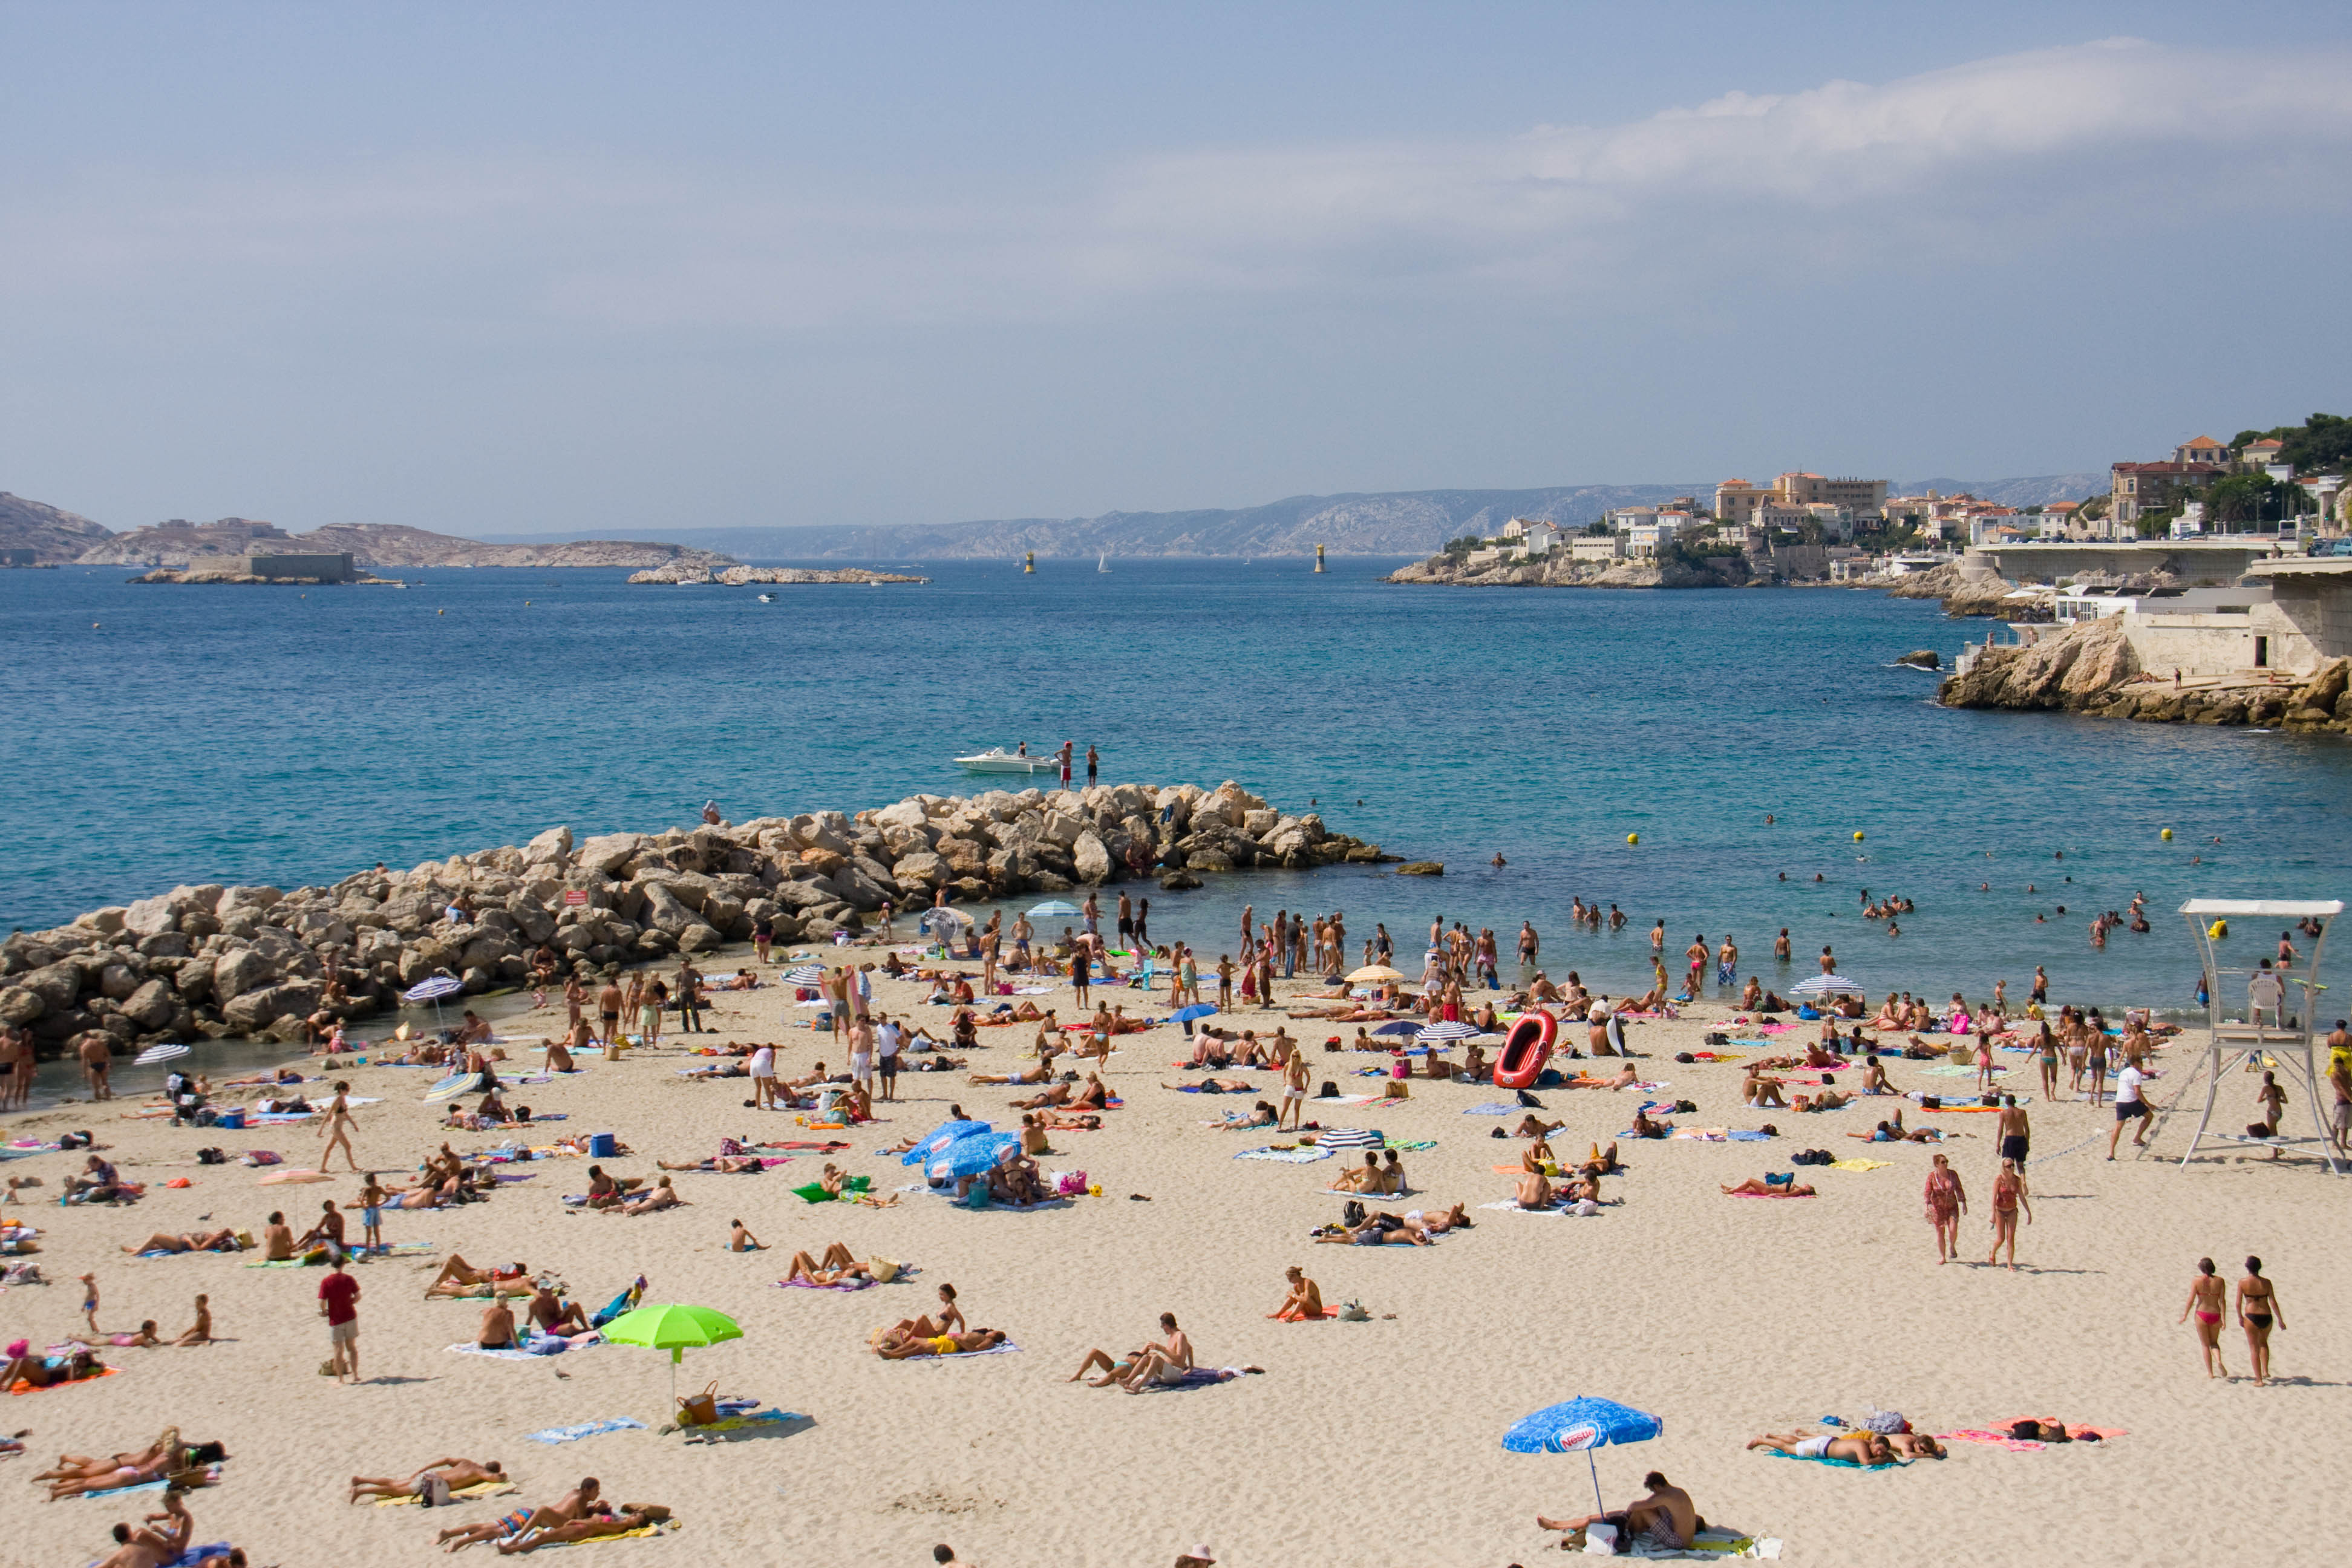 Beach hotels in Marseille, France wallpapers and images - wallpapers